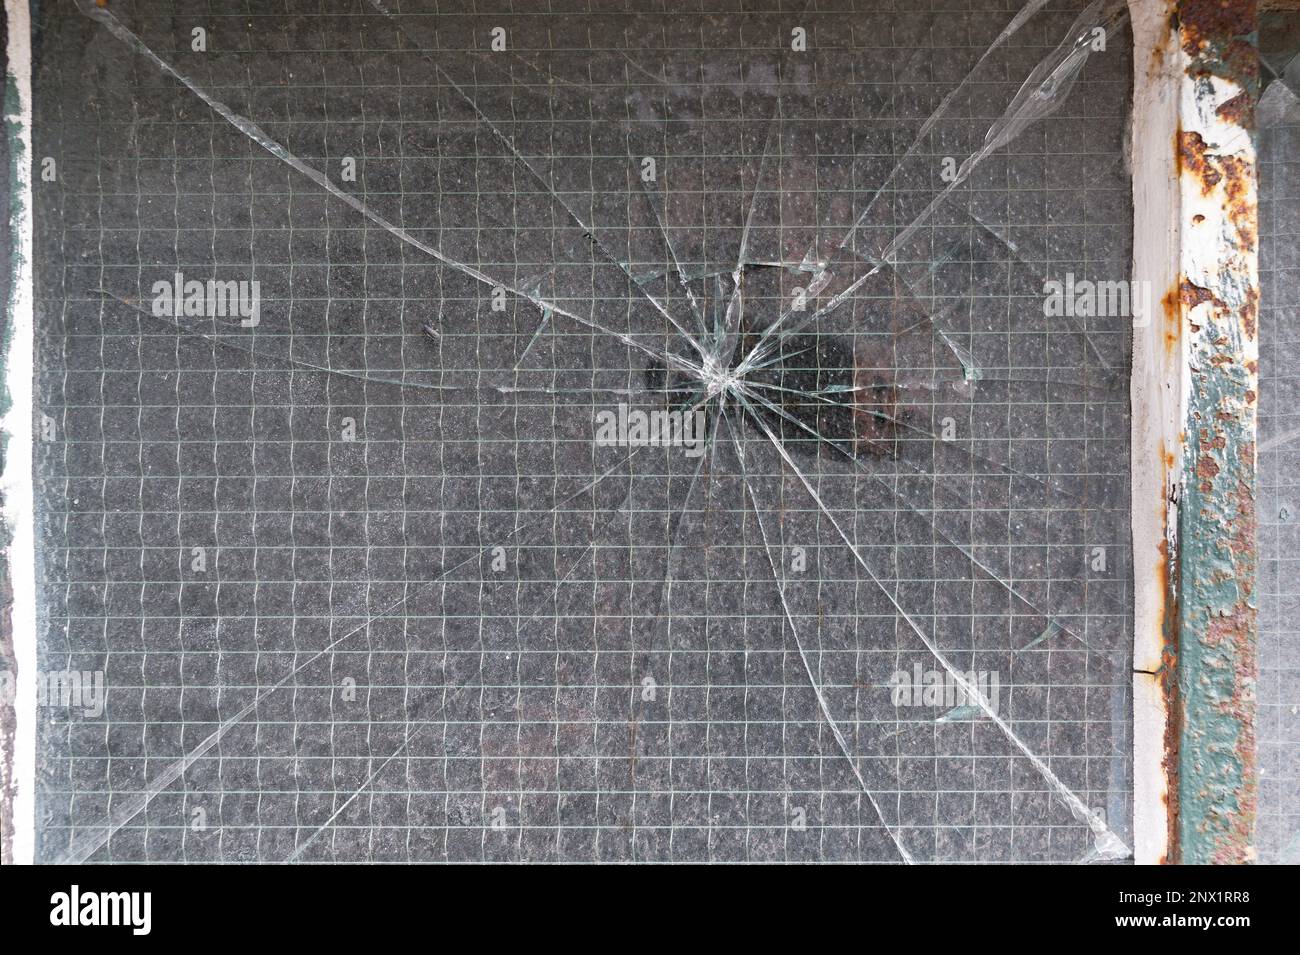 Cracks radiate from a central impact point on a reinforced window. Stock Photo